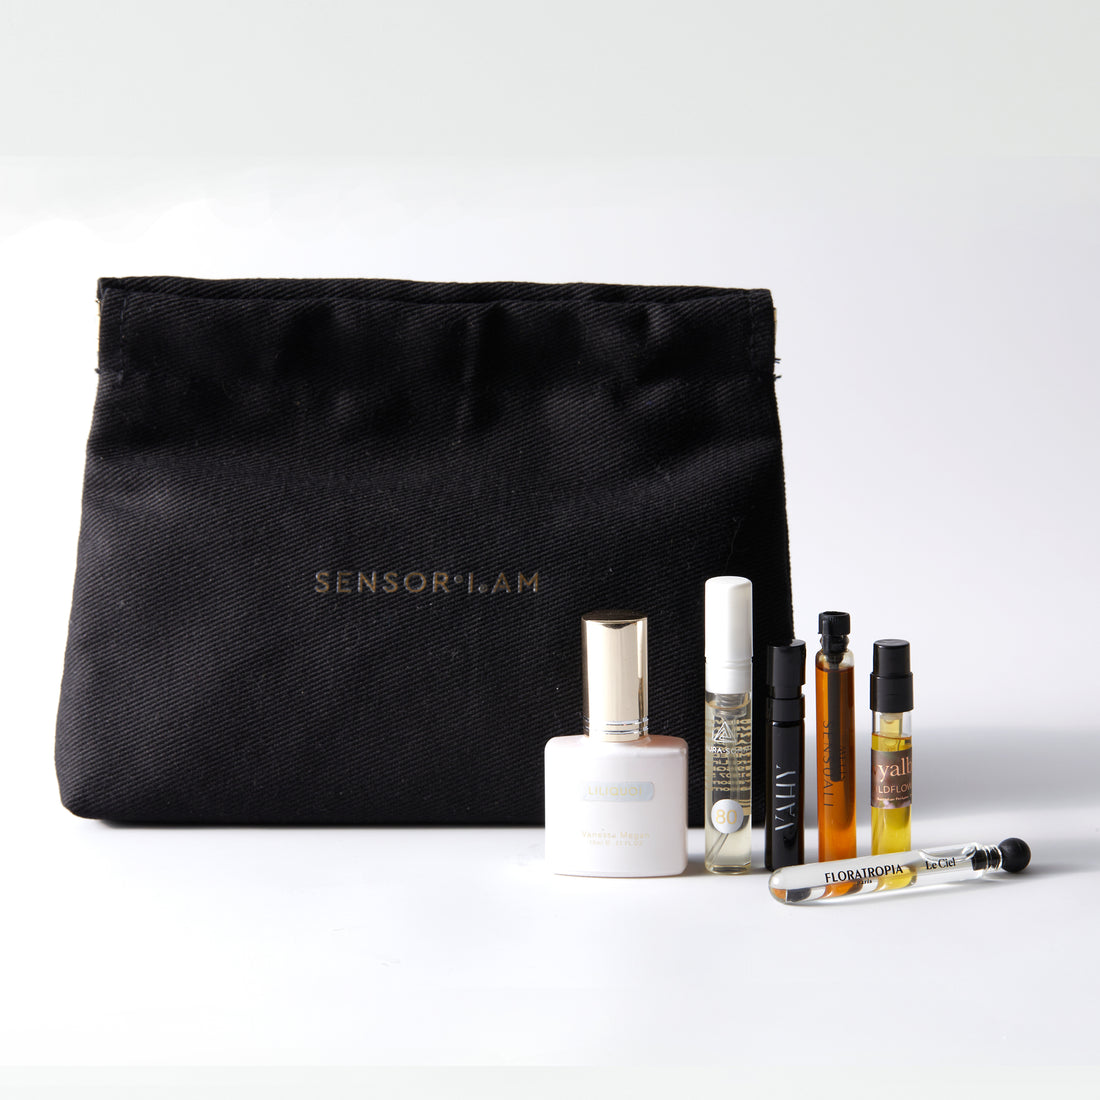 We know that buying perfume online isn't easy. You want to try the scents before you buy a full size fragrance. That's why we've put together these mini fragrance sampler sets. Try our Sensoriam FLORAL SAMPLER SET TODAY.